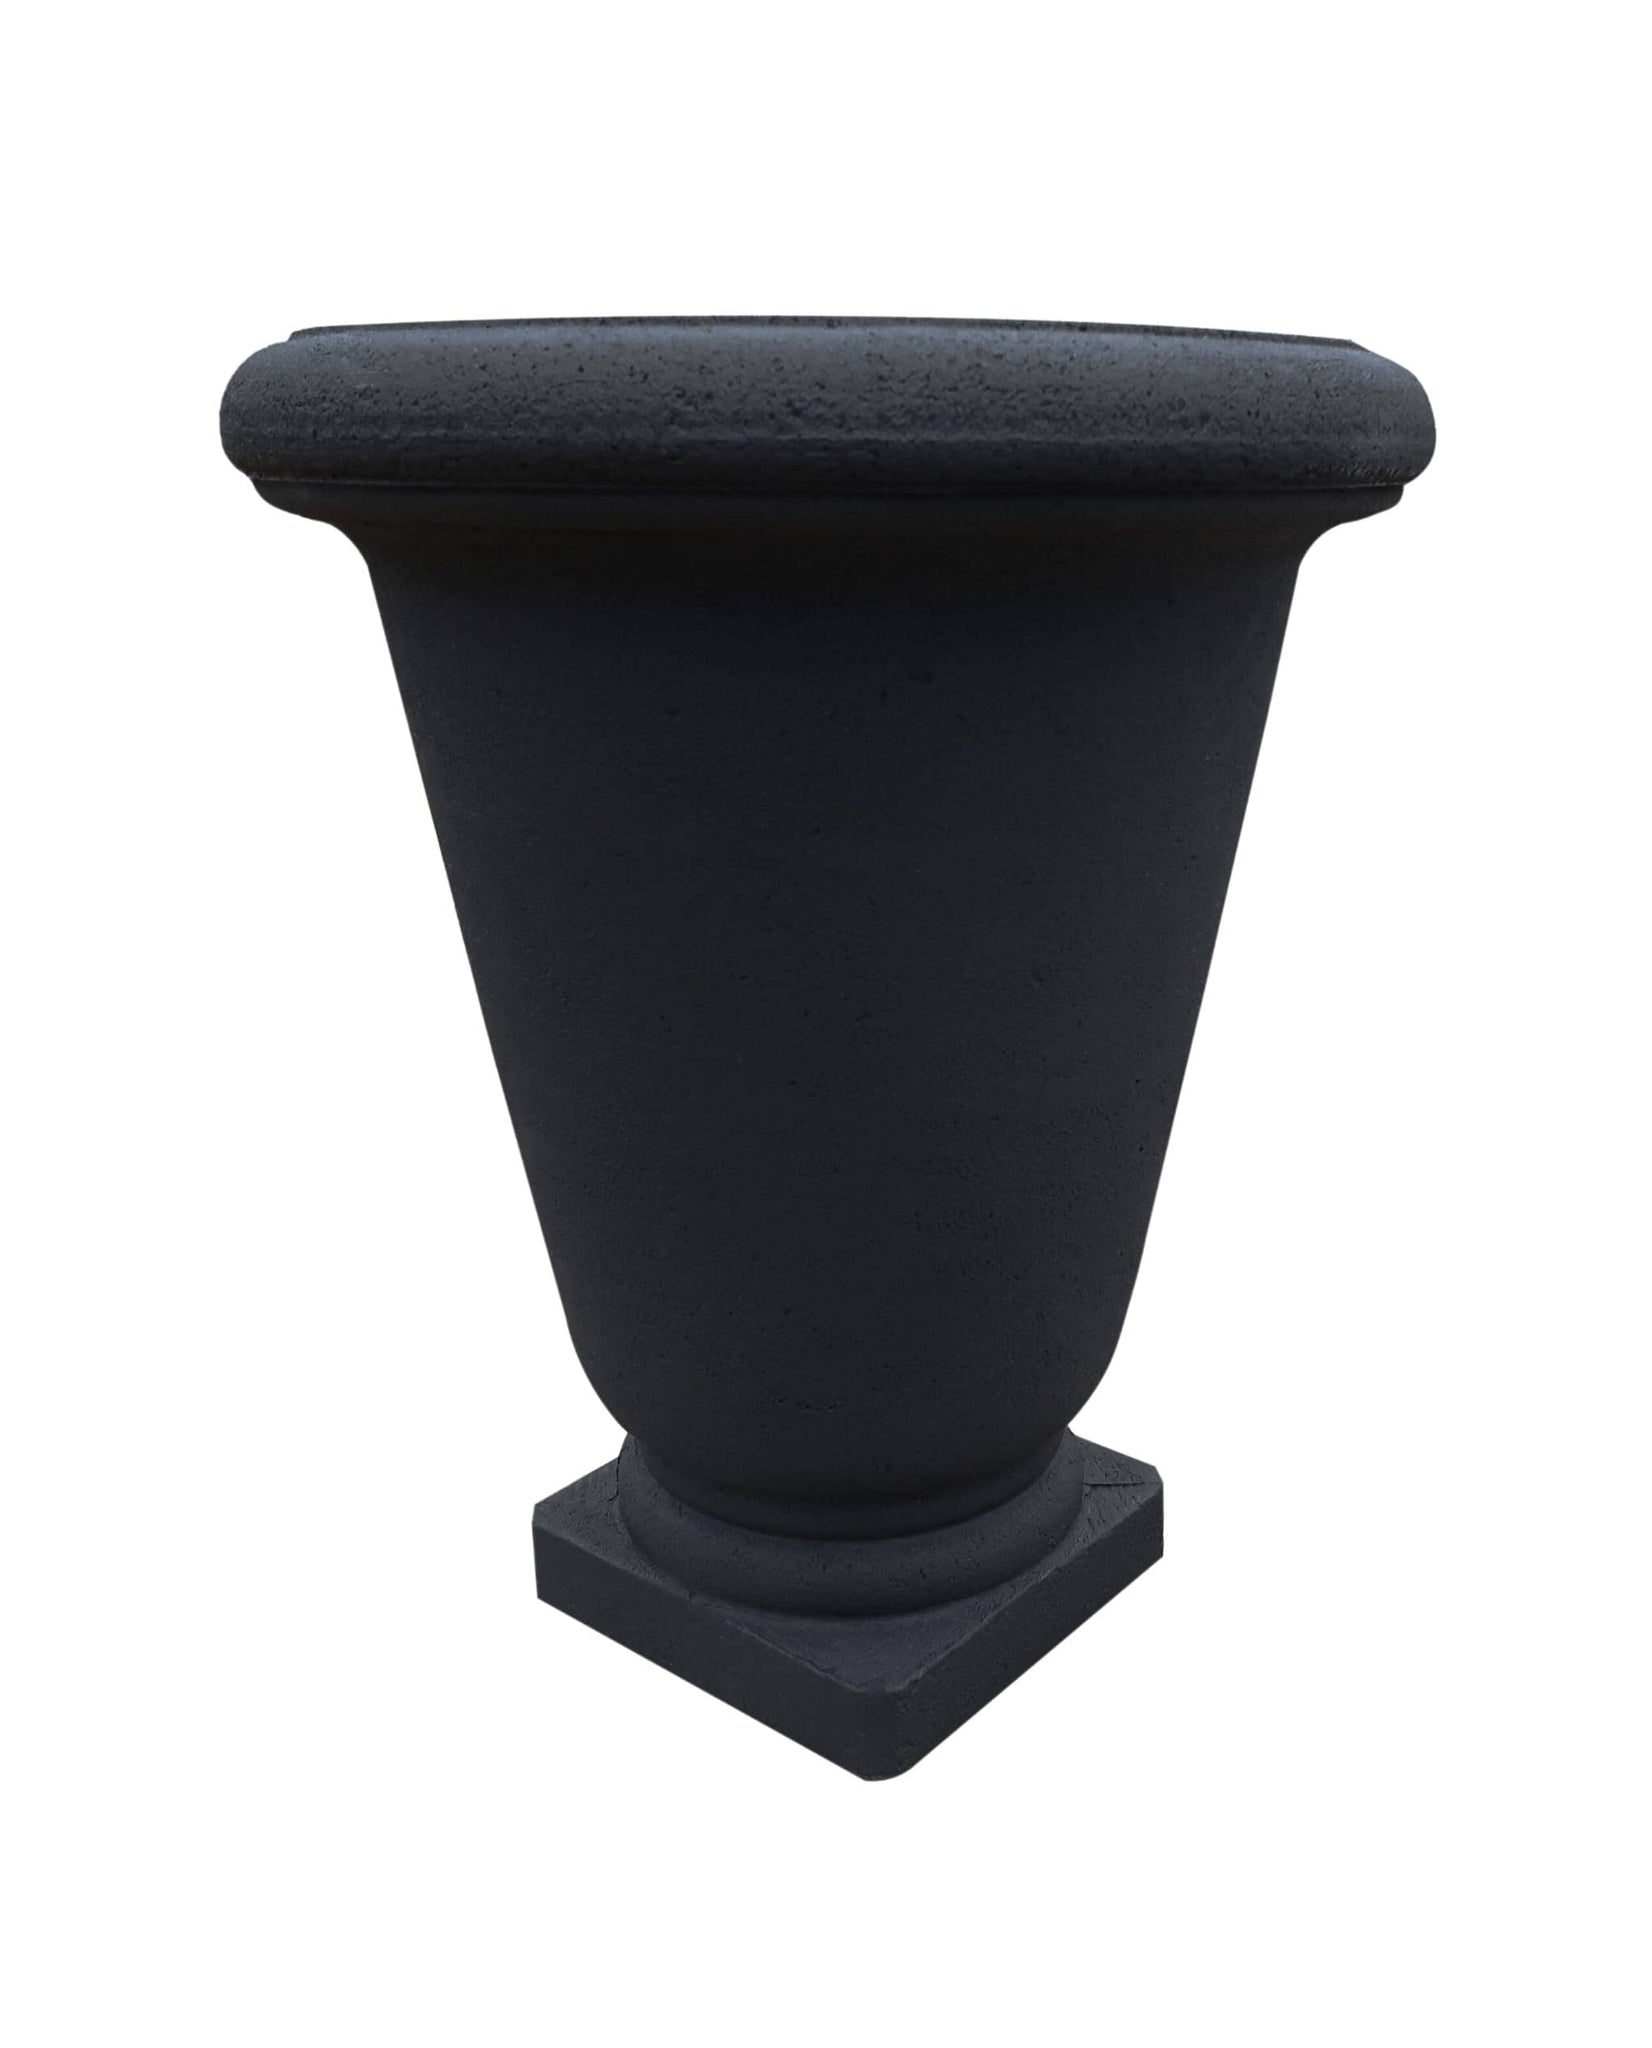 Classic style Japi Bell Urn in the colour Lead. Florastyle by Hingham. Textured finish. Styles beautifully with modern and tclassic  decor trends